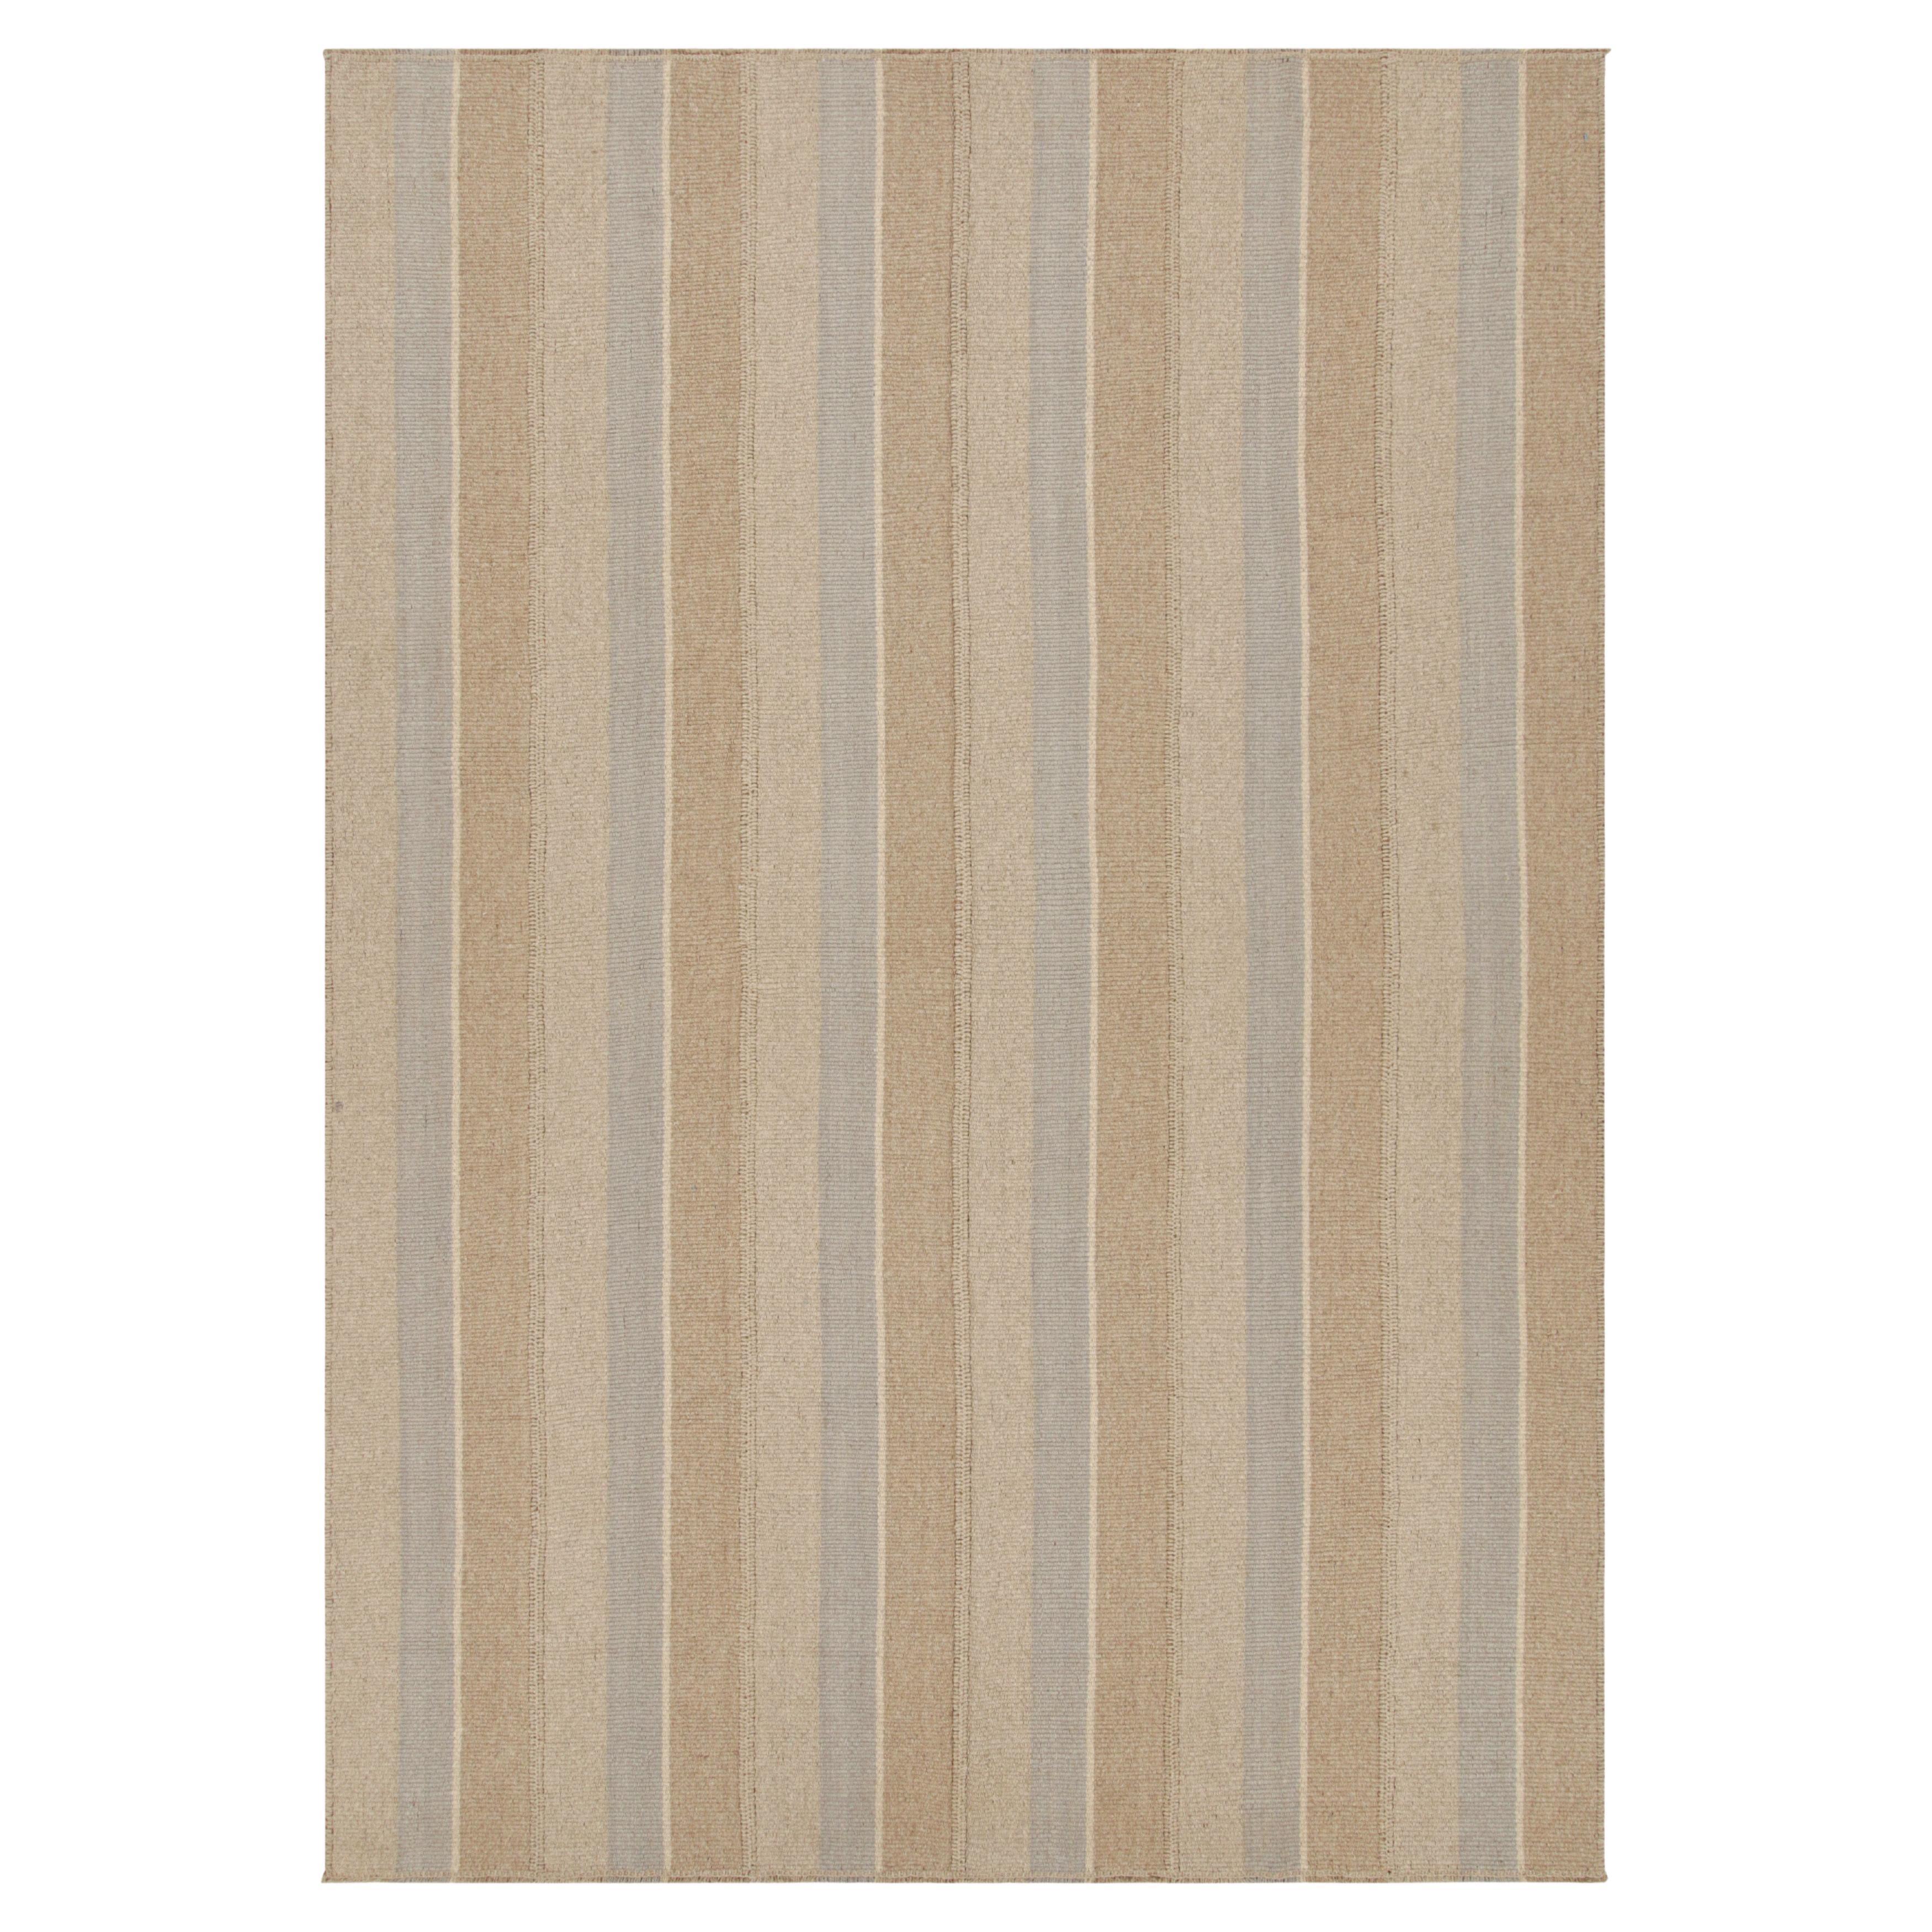 Rug & Kilim’s Contemporary Kilim in Gray and Beige-Brown Textural Stripes  For Sale